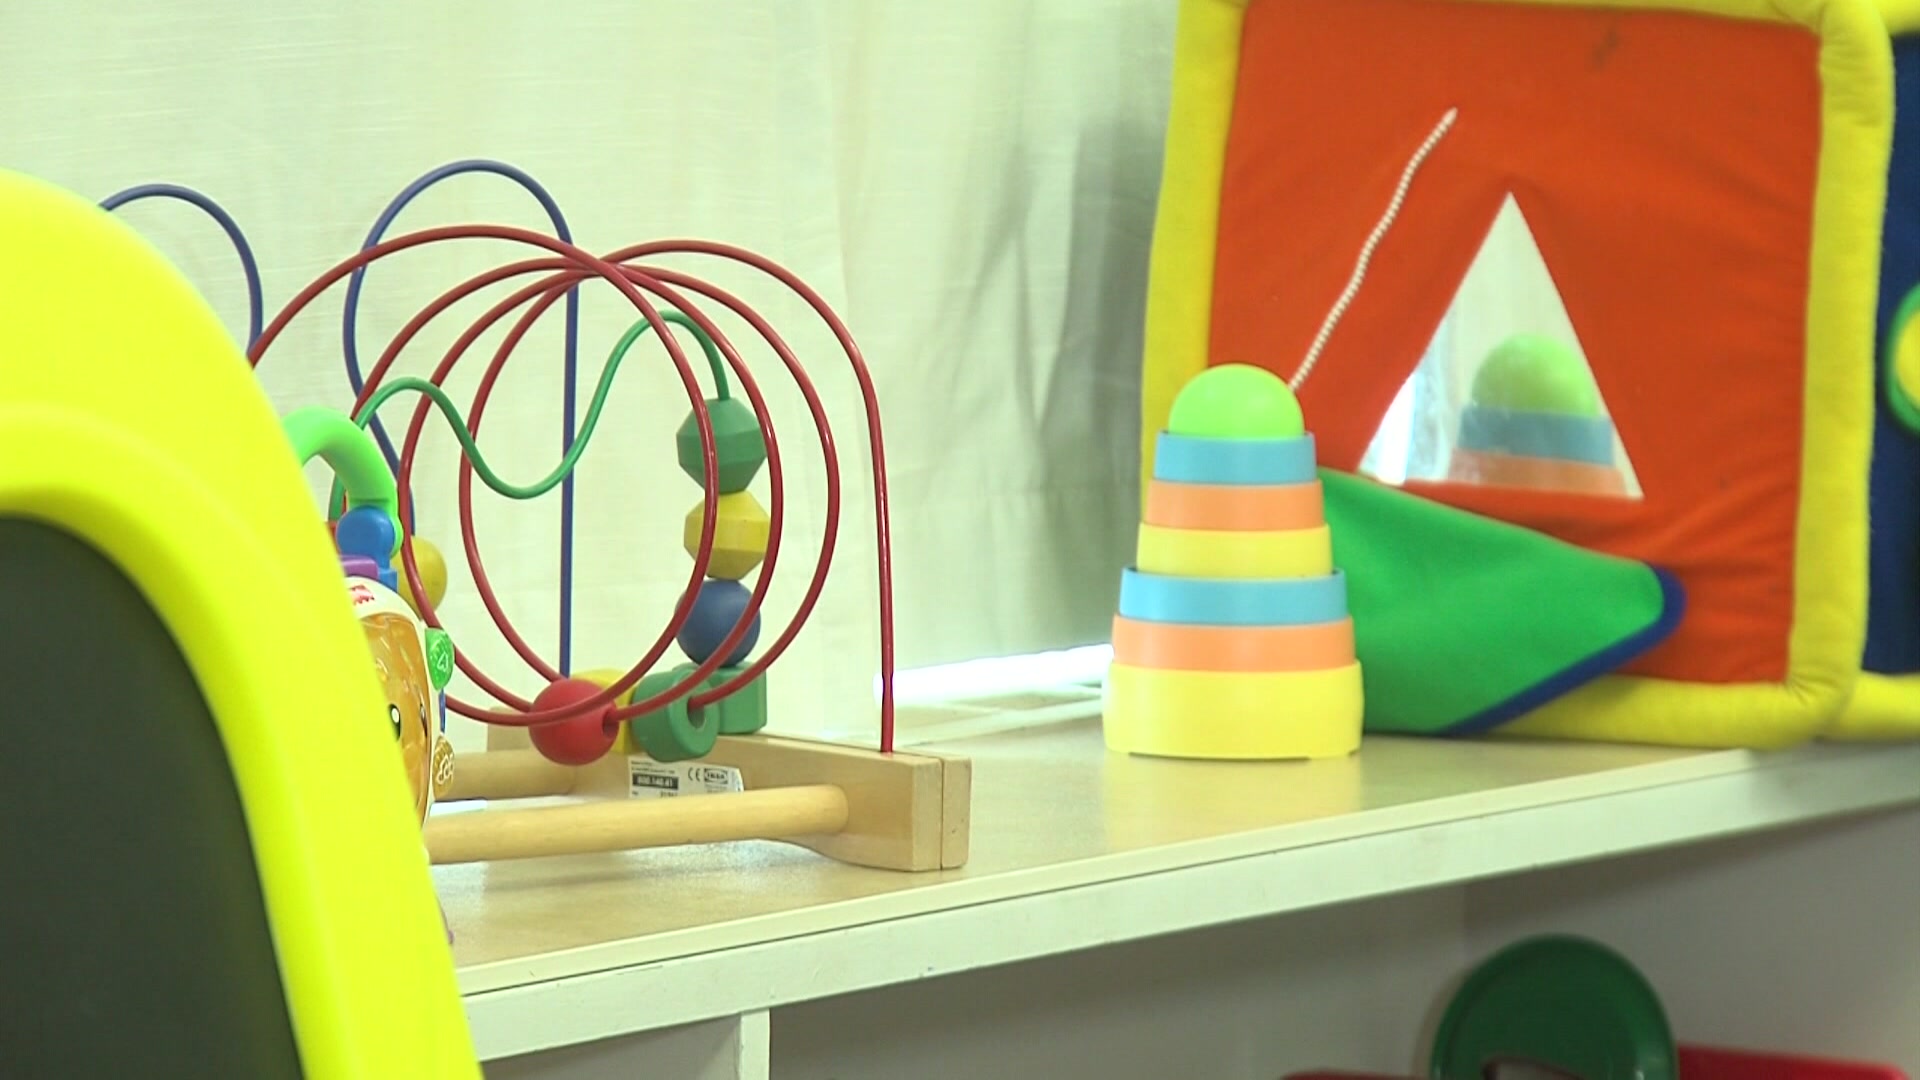 Growing concerns about day care safety after recent allegations of abuse in Waukesha County